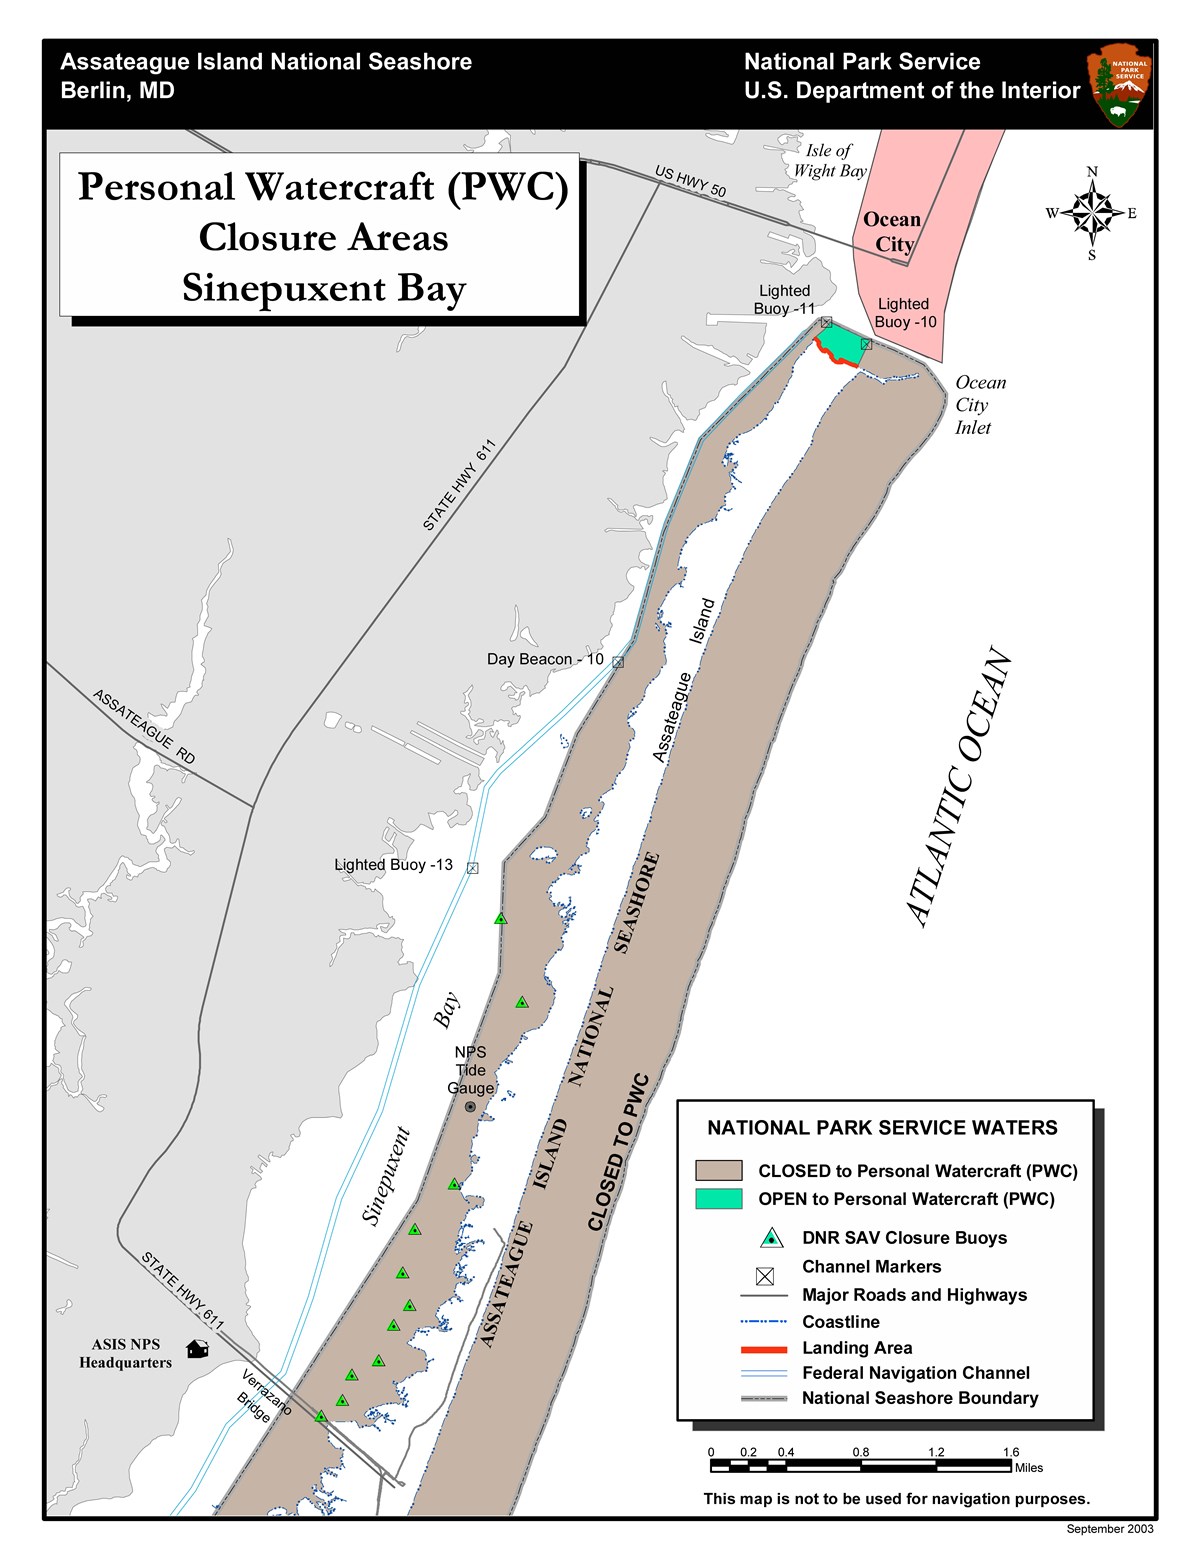 map of Personal Watercraft (PWC) closures and access areas in the Maryland District